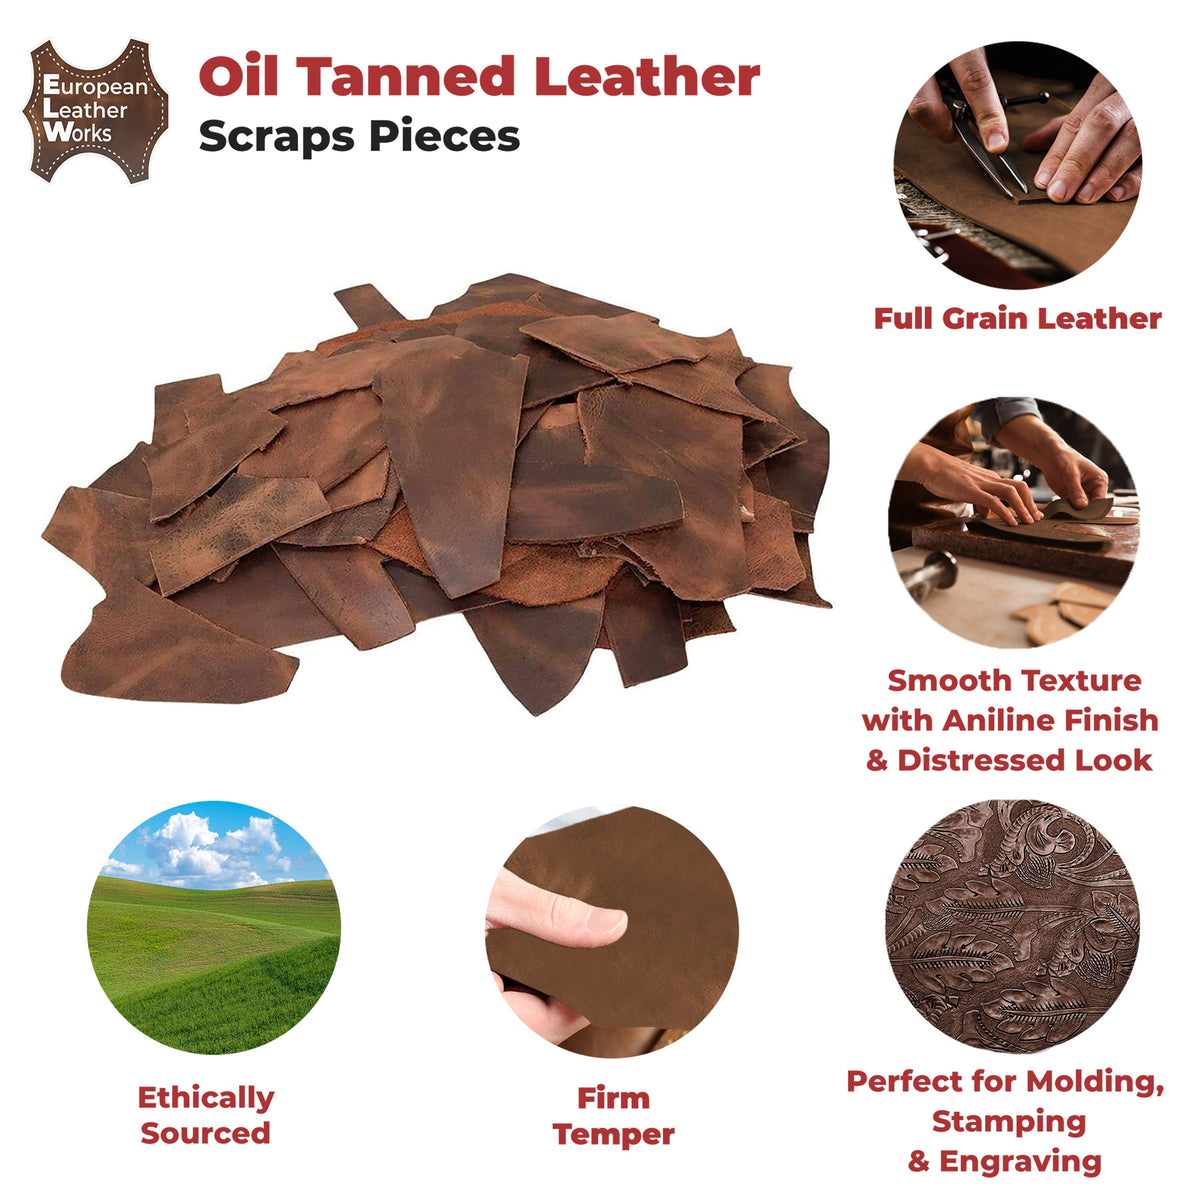 Two Pounds Veg Tan Leather Scrap, 2 lbs Vegetable Tanned Scrap Leather  Pieces for Crafting, Heavy Weight Thick 8-9 oz Mixed with 6-7 oz and 7-8 oz  Veg-Tan Tooling Leather Remnants